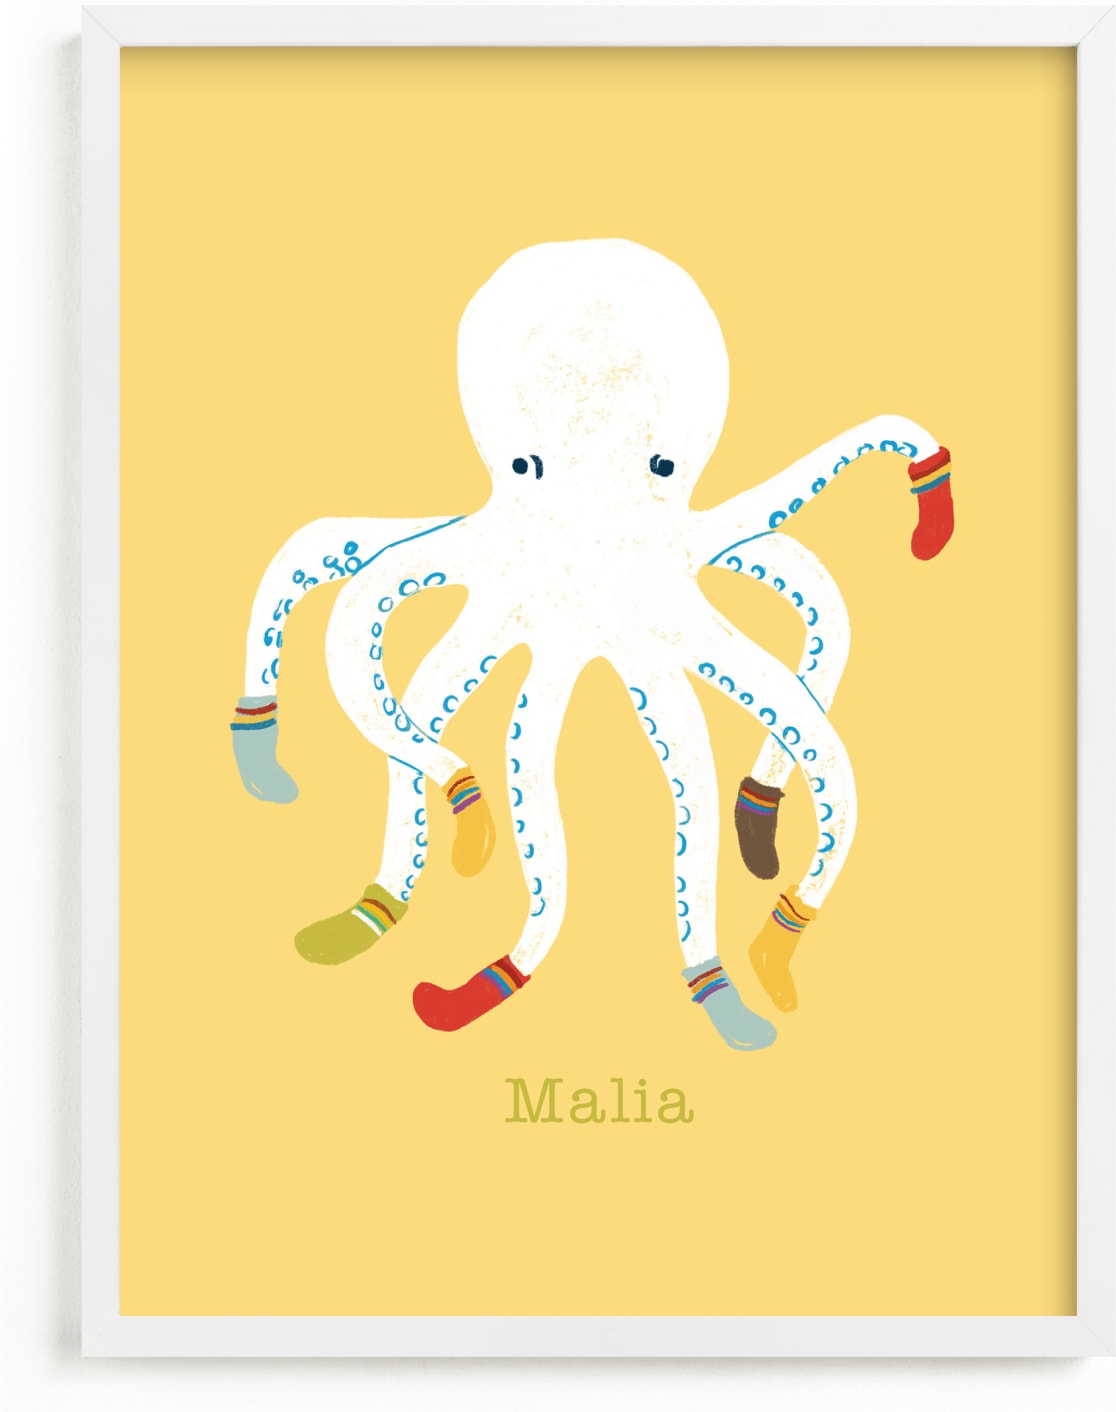 This is a yellow personalized art for kid by Celeste Duffy called Socktopus.